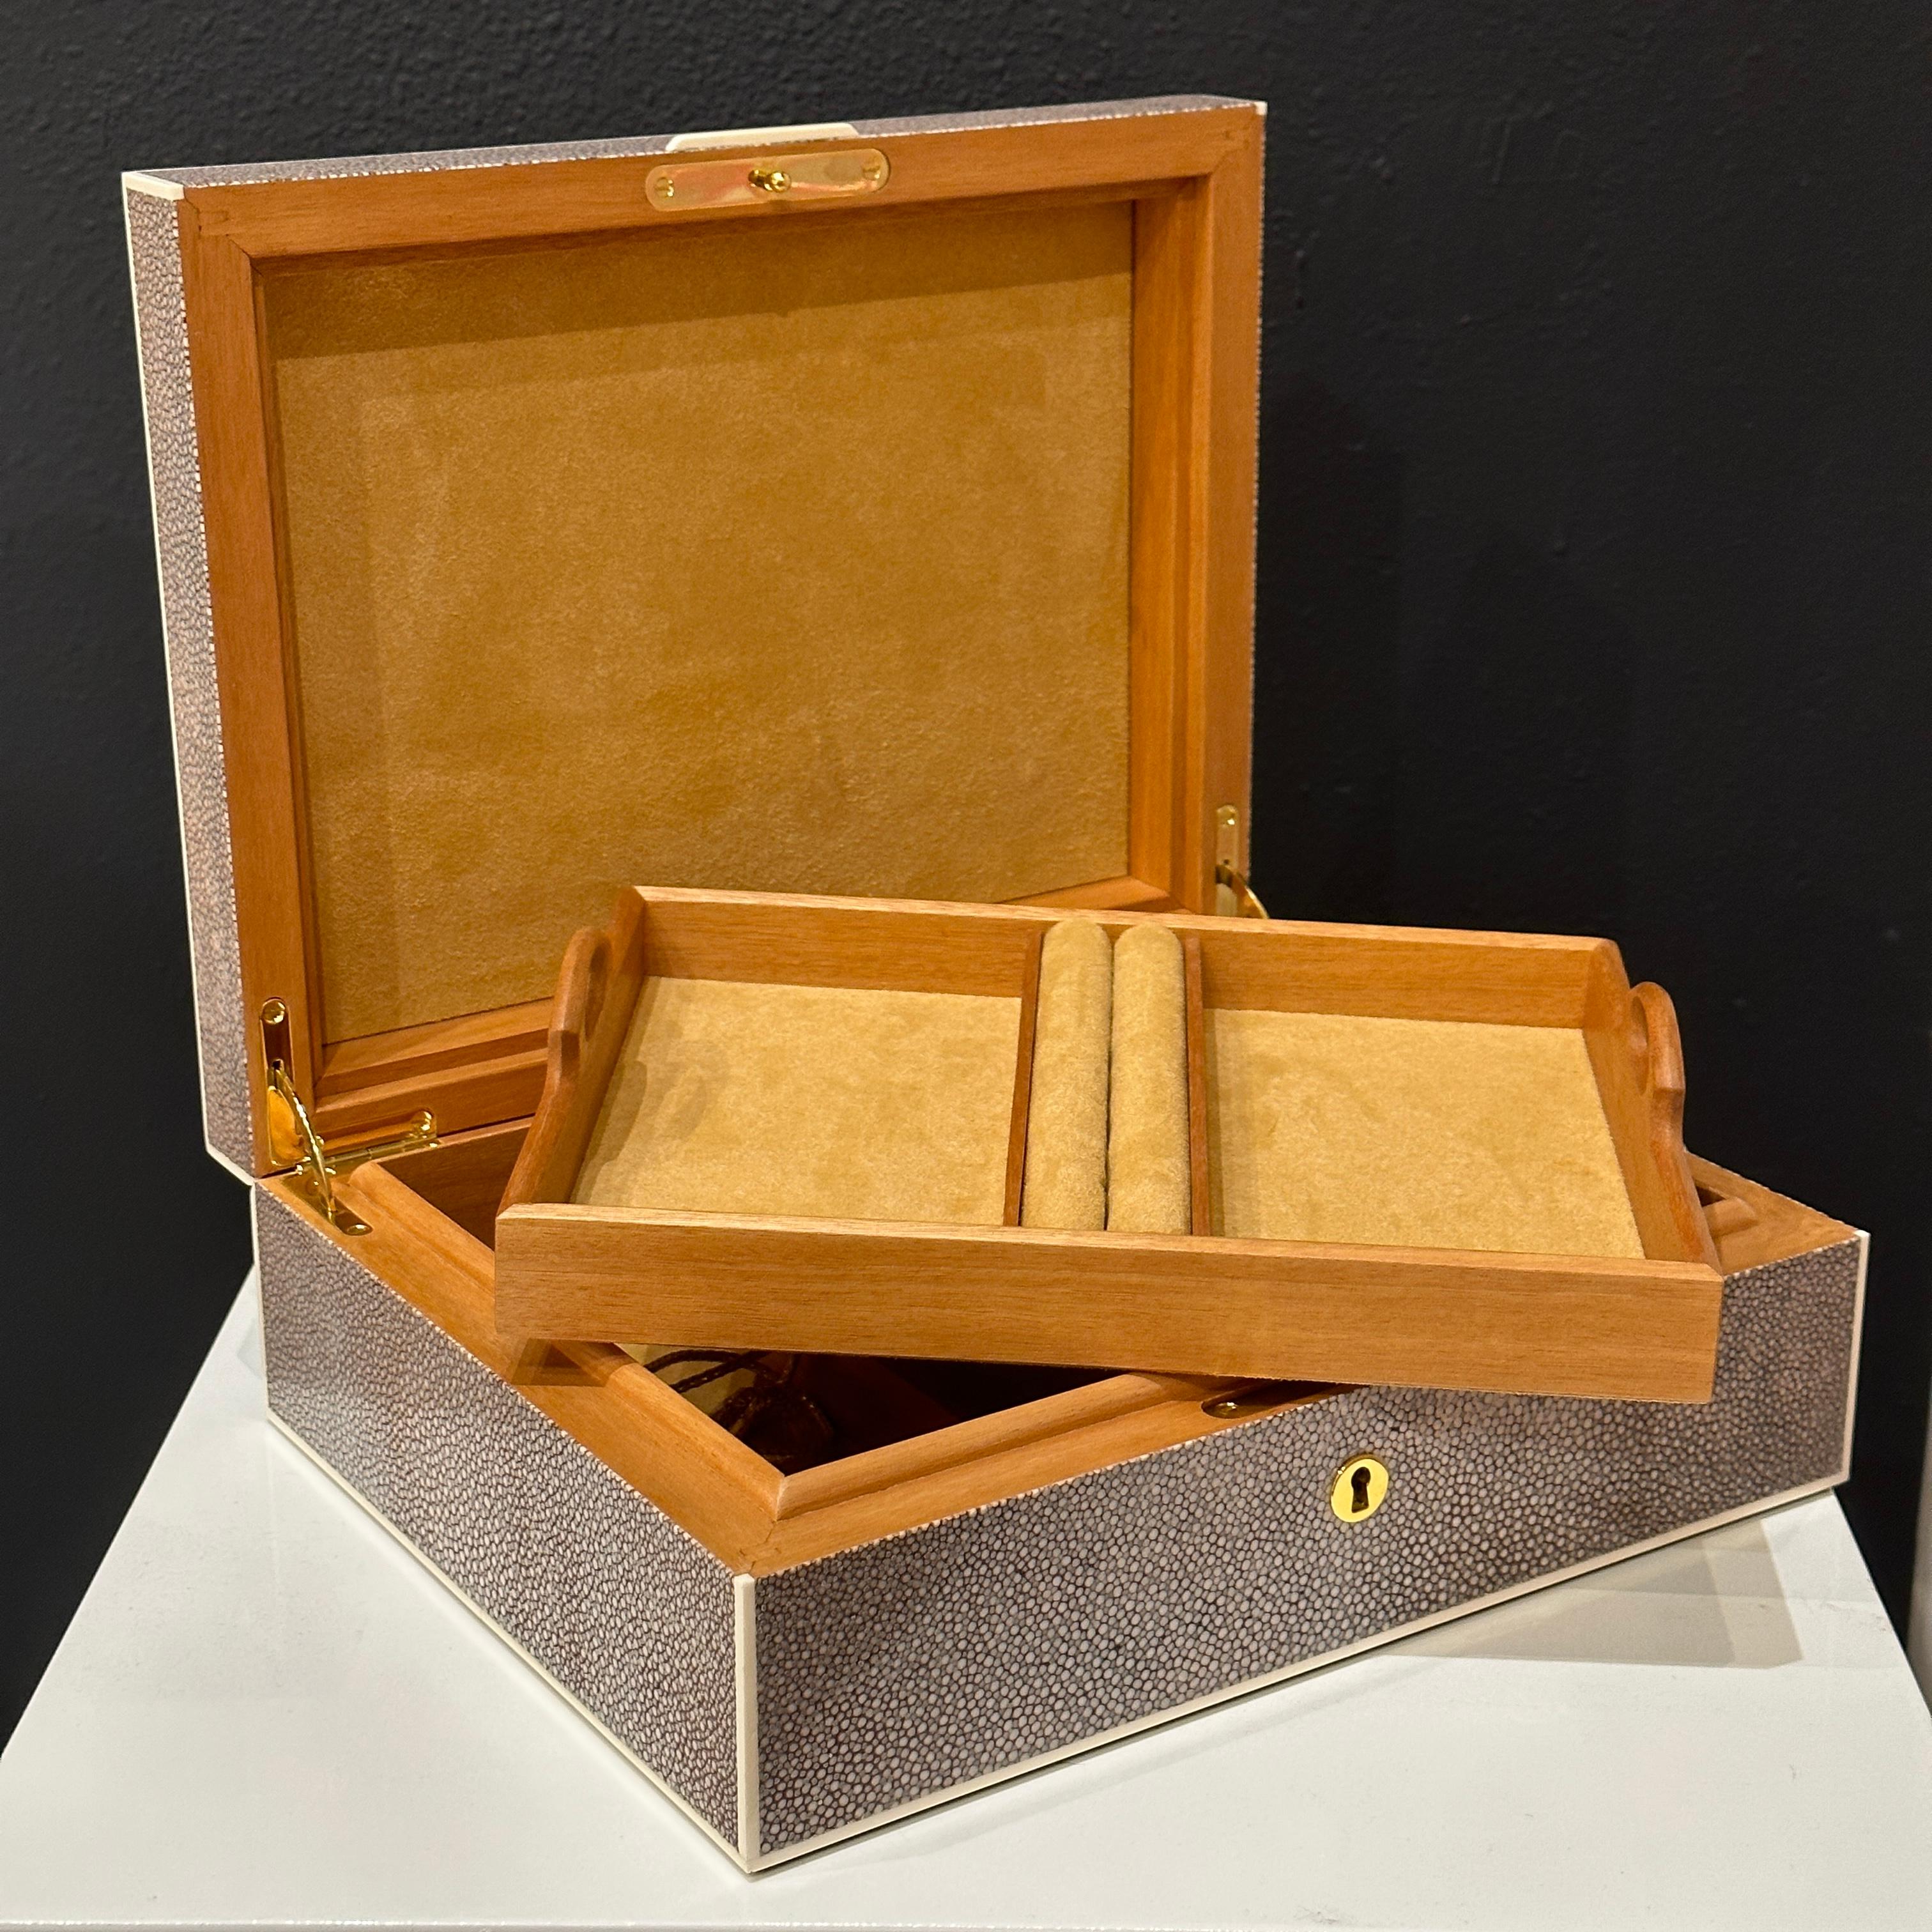 Cuir d'Ocean France Bespoke Shagreen Watch and Cufflink Box w Bone Trim and Key In Good Condition For Sale In Cathedral City, CA